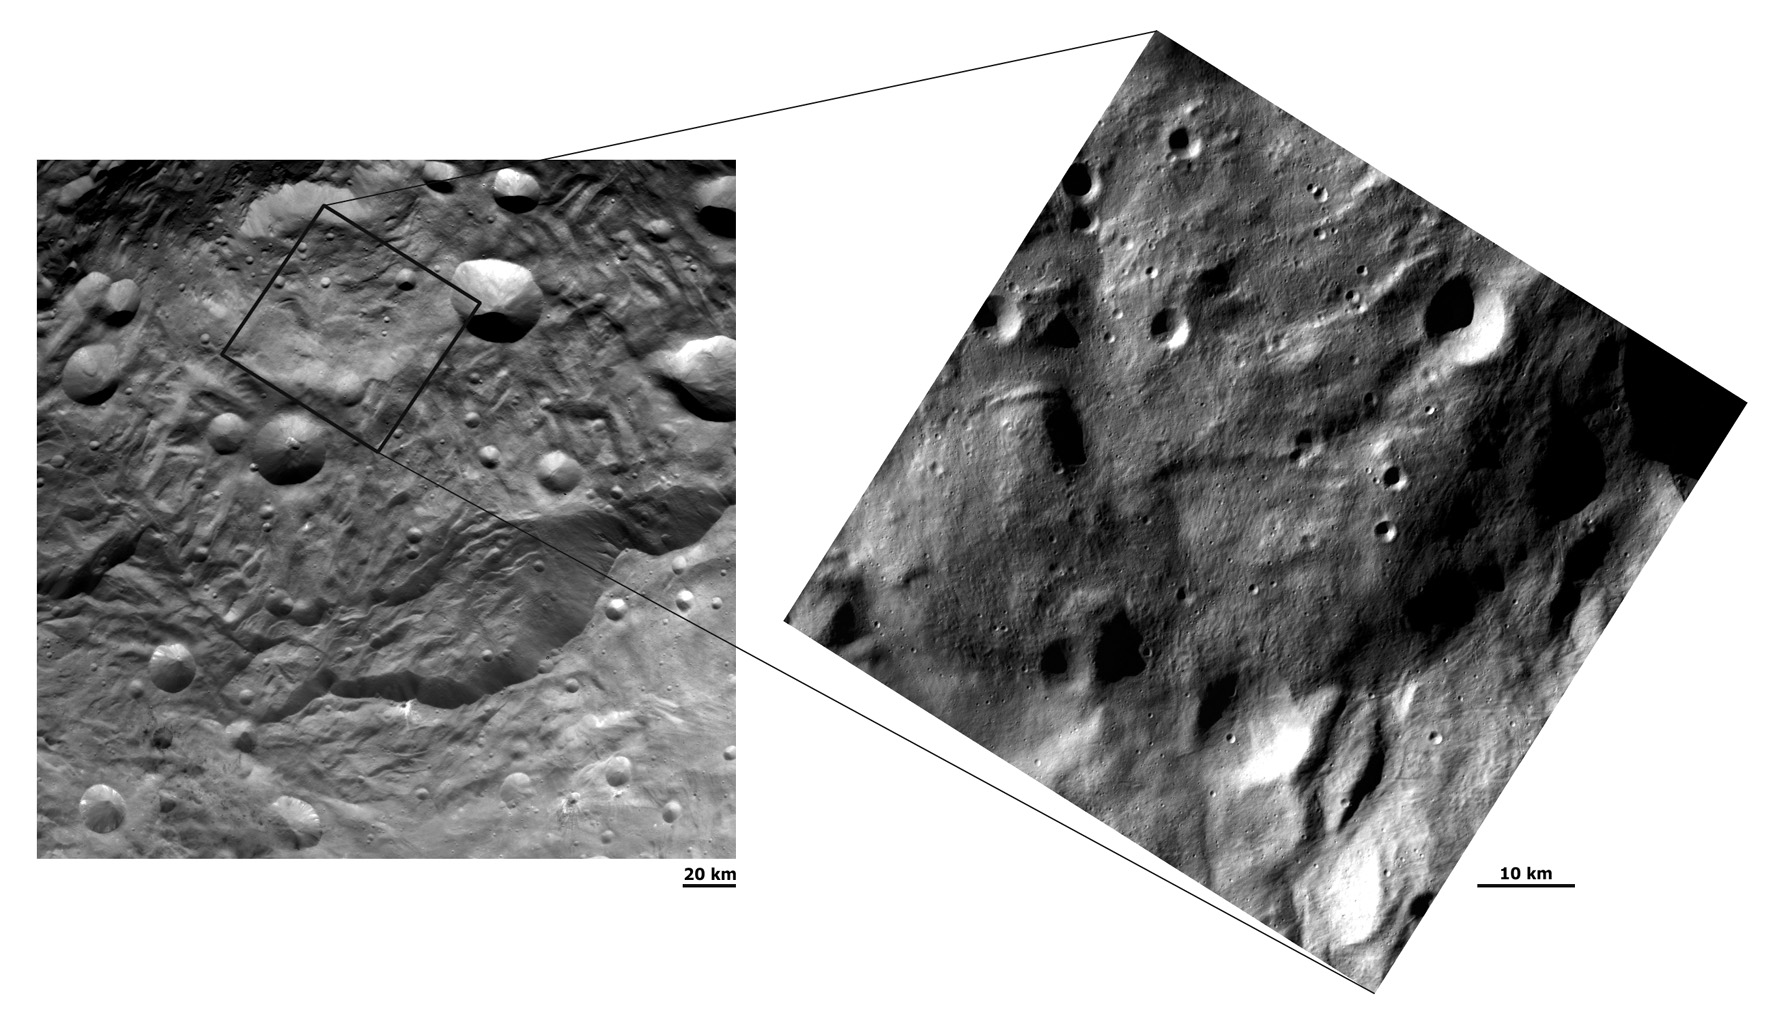 Two Different Resolution Images of Vesta's South Polar Region